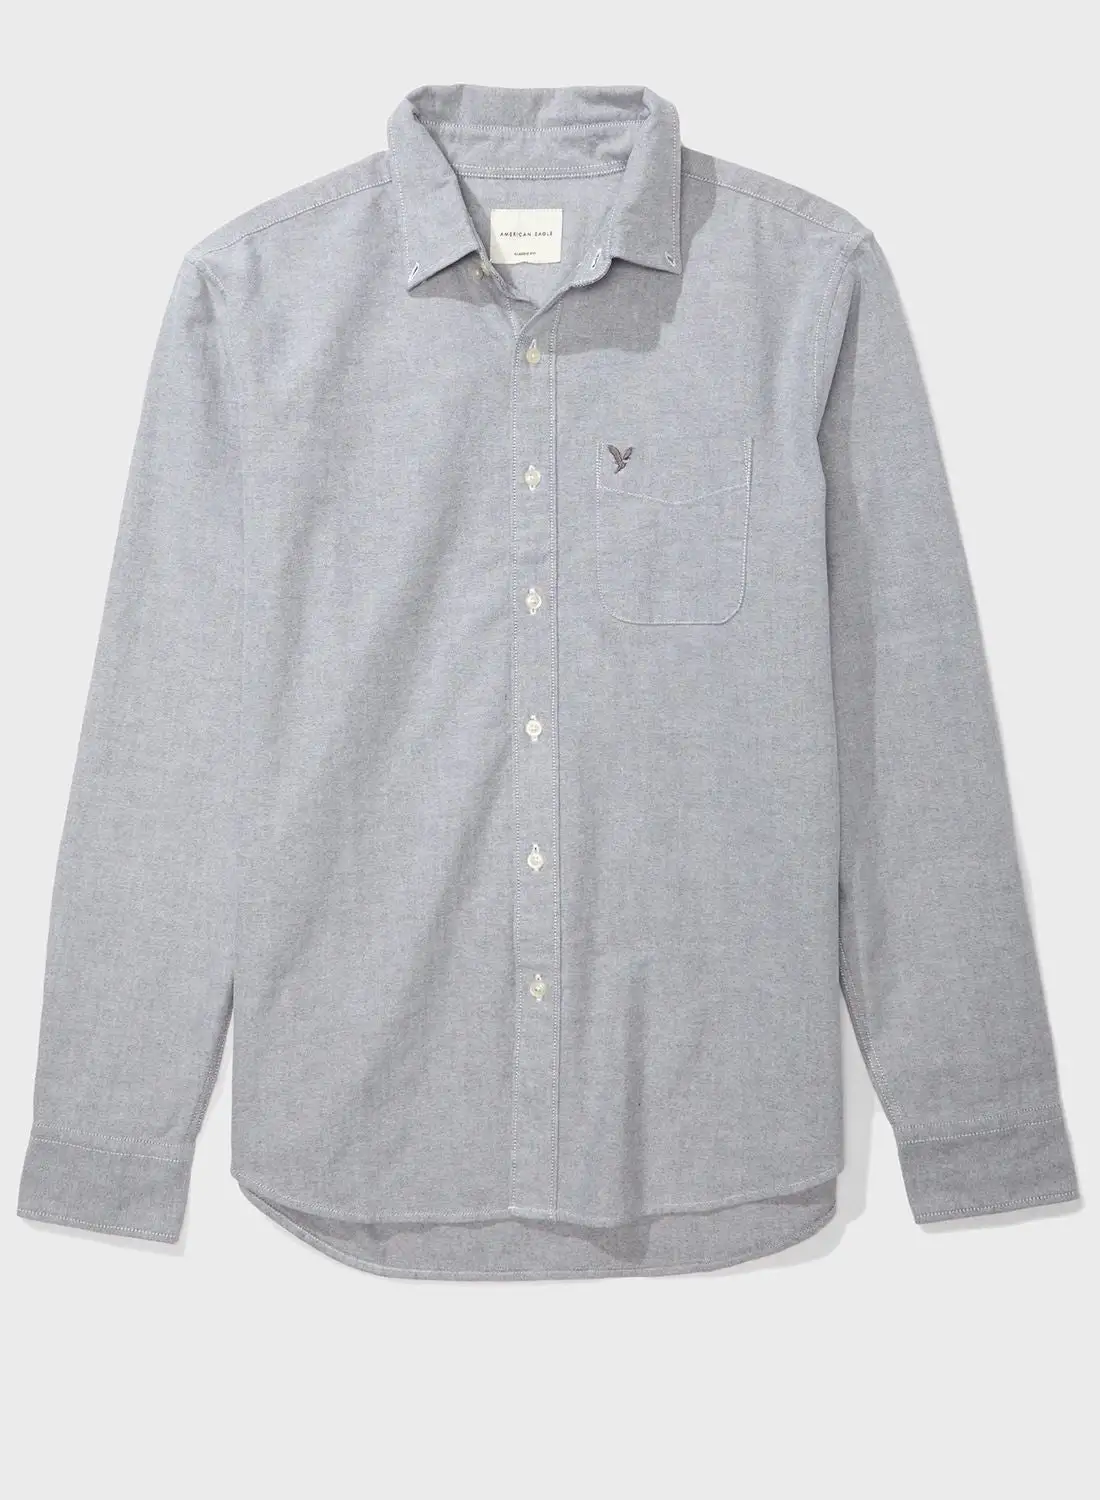 American Eagle Oxford Classic Fit Shirt